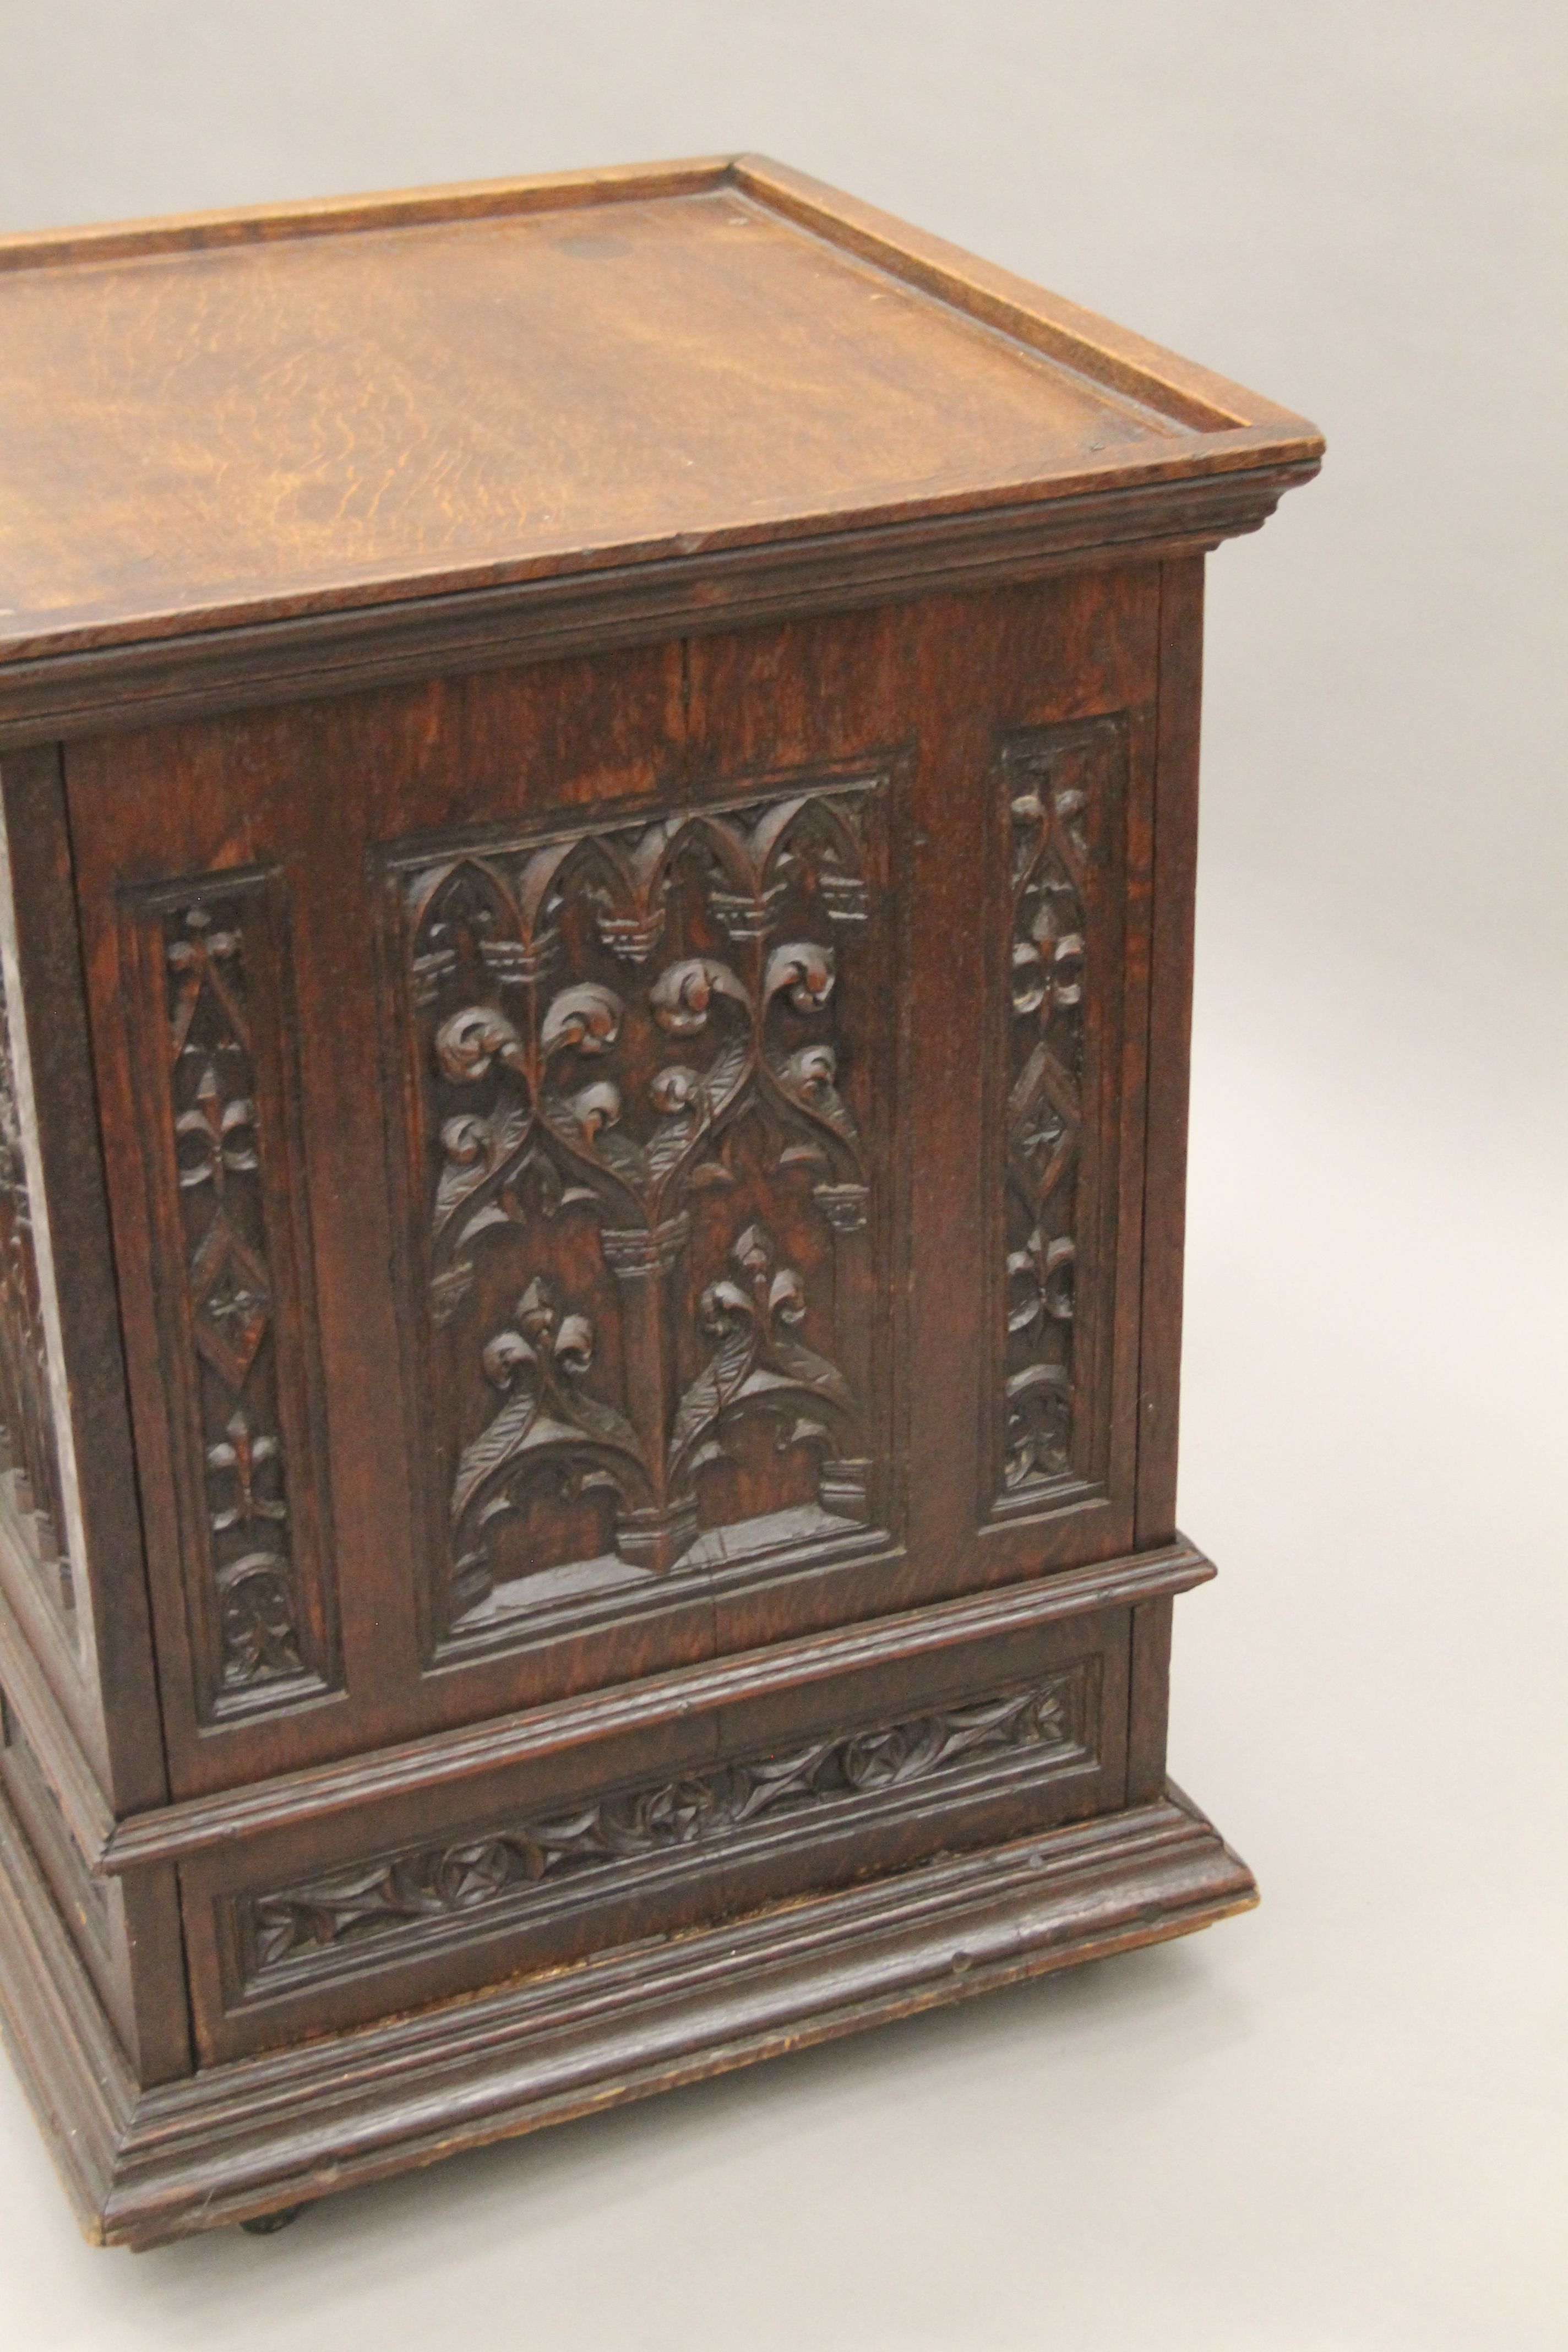 A small Victorian carved oak Gothic Revival cabinet with base drawer. 51.5 cm square. - Image 7 of 7